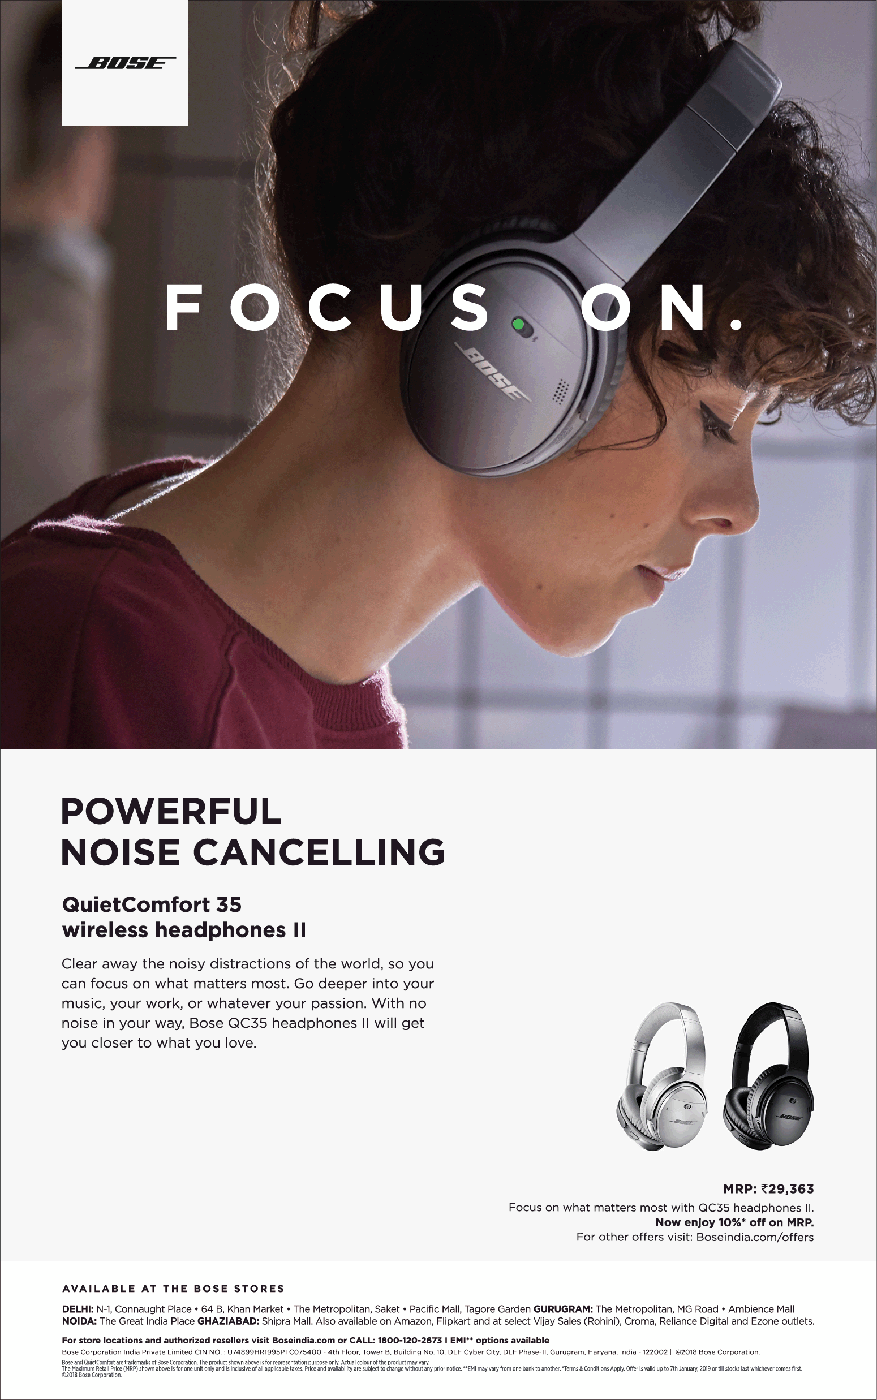 bose-focus-on-powerful-noise-cancelling-ad-delhi-times-15-12-2018.png